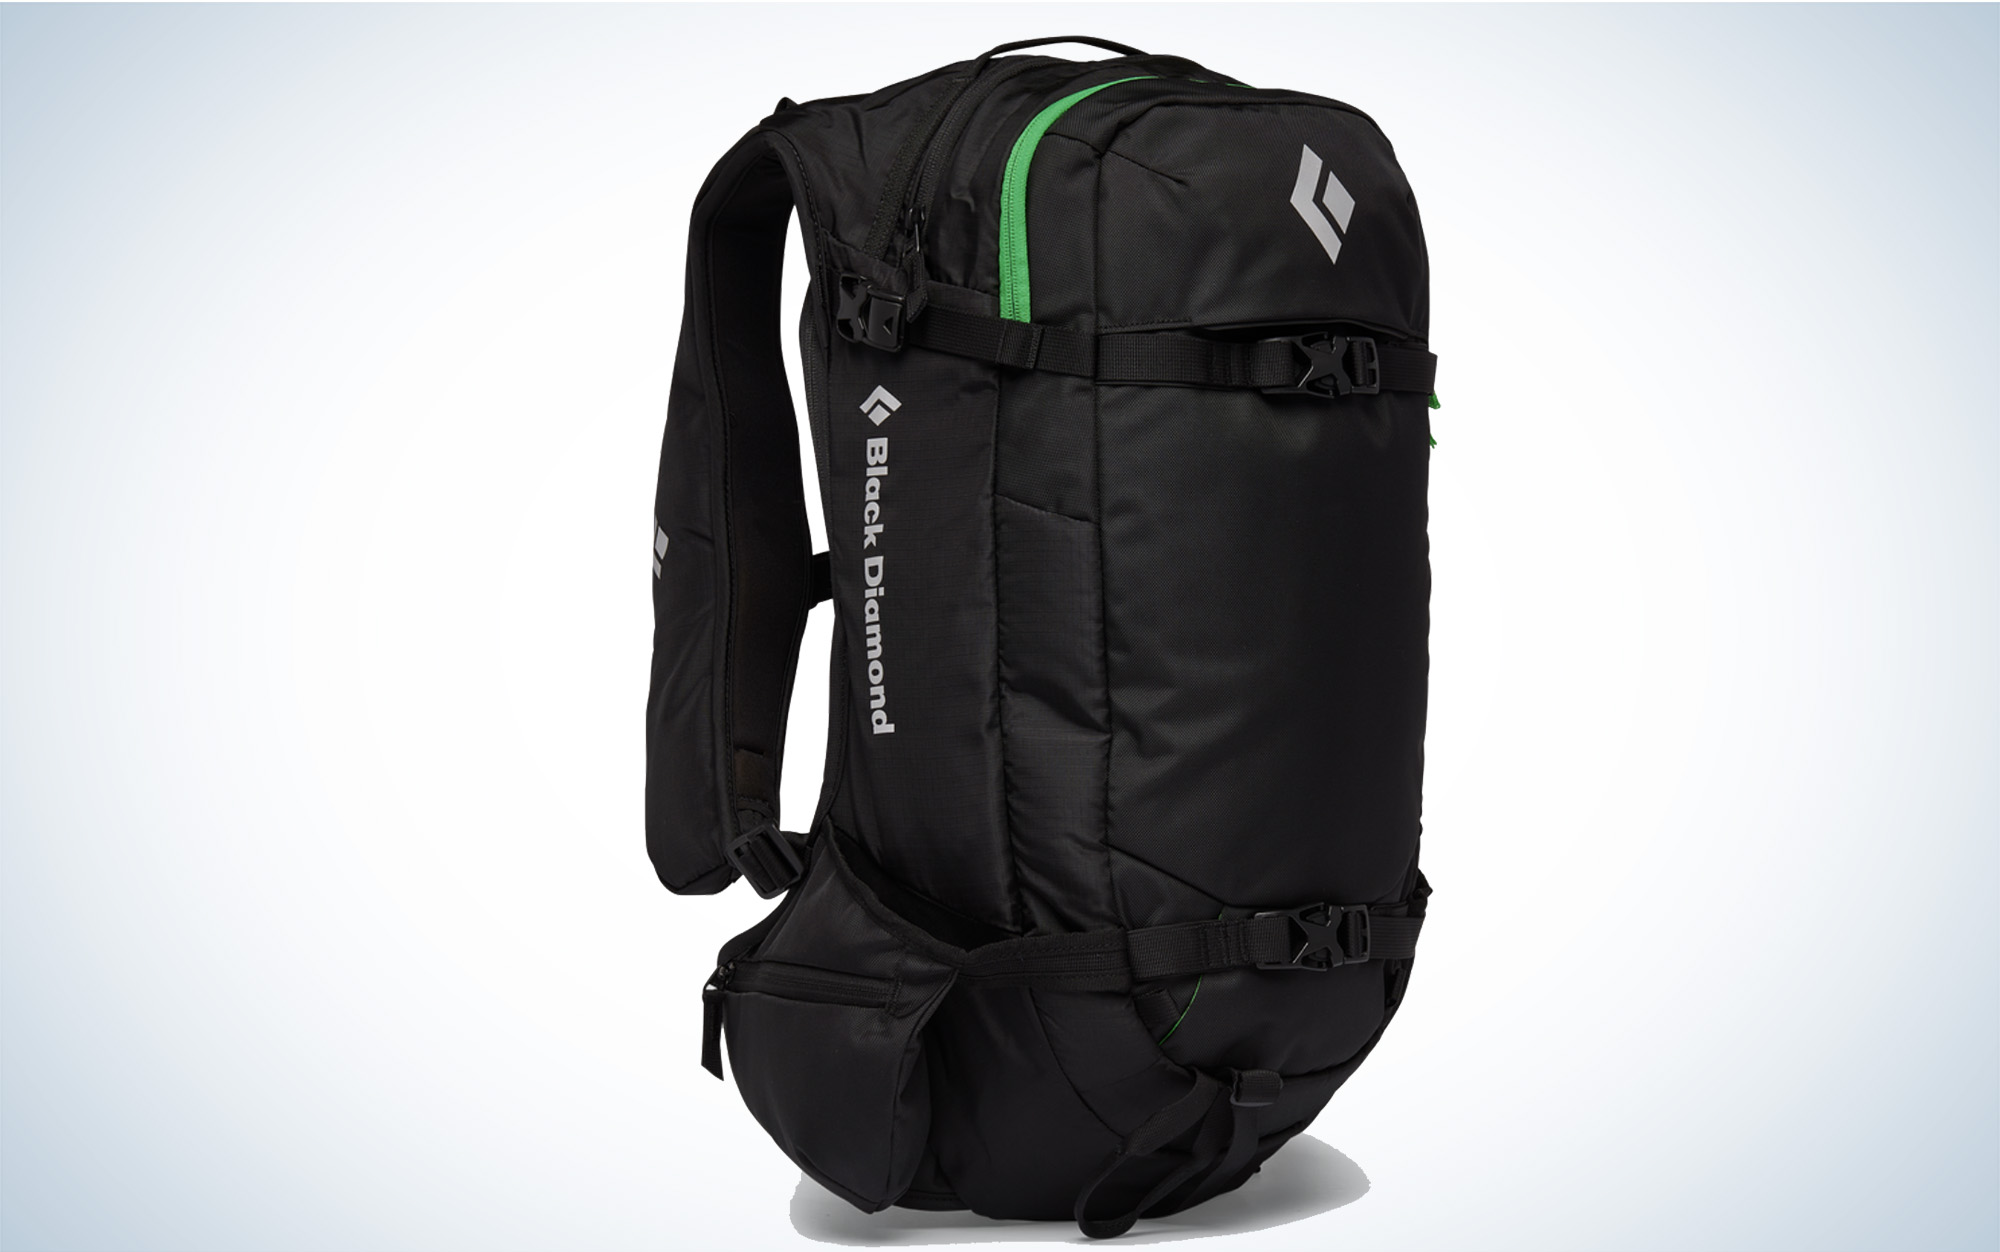 The Black Diamond Dawn Patrol 25L is one of the best winter backpacks for resort riding.